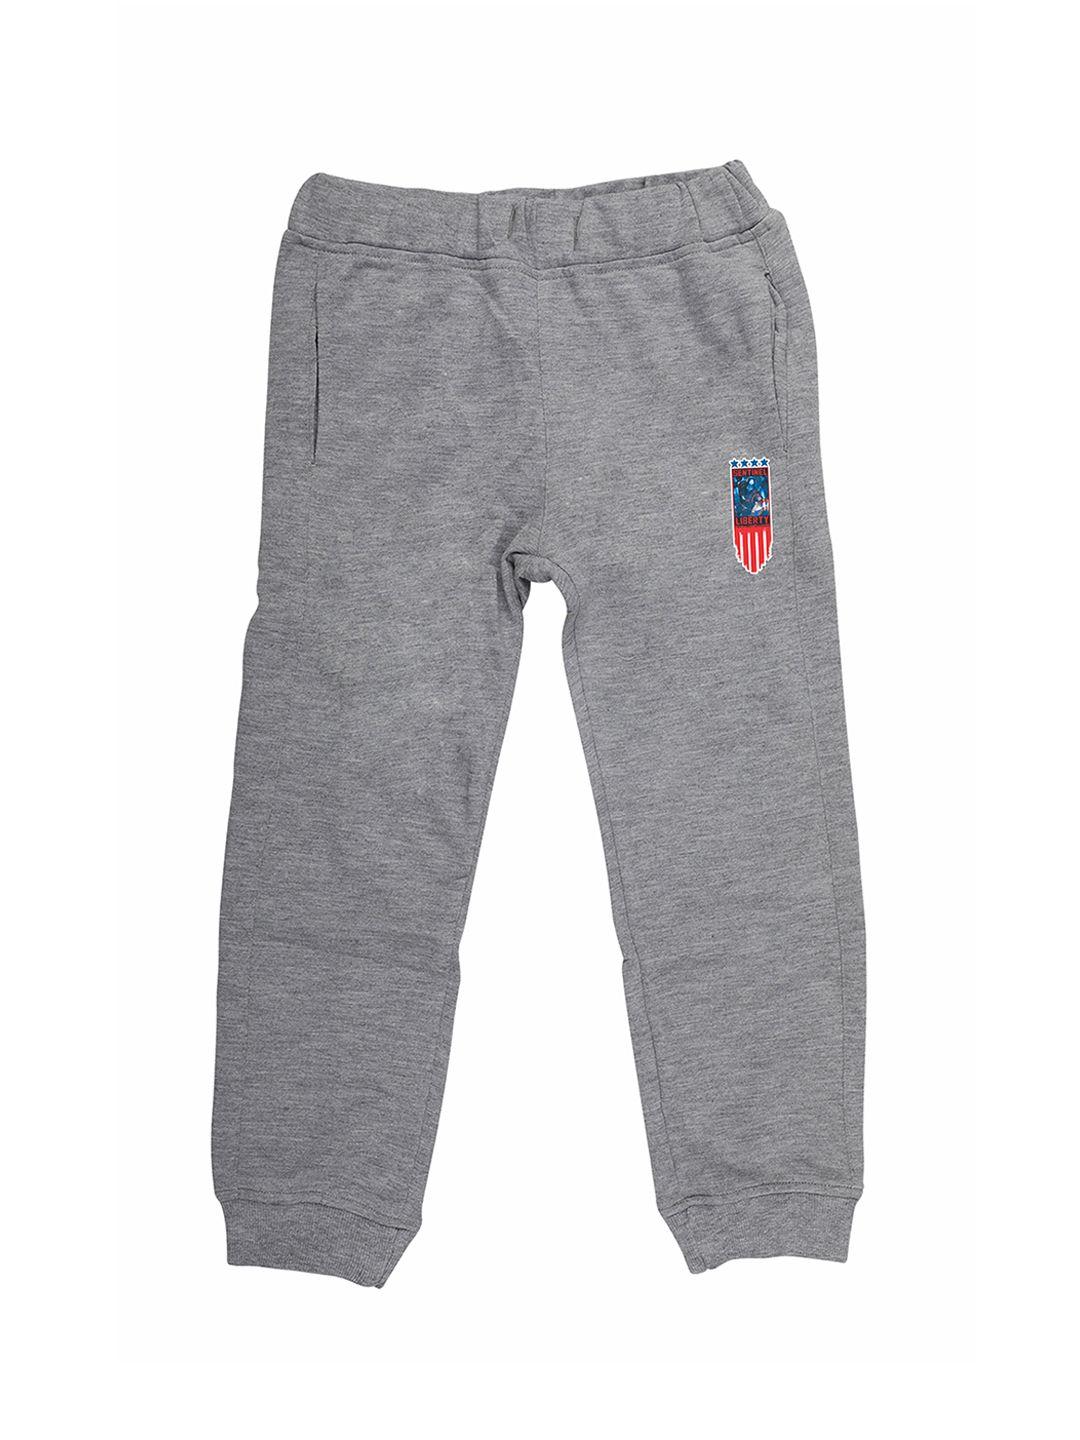 marvel by wear your mind kids grey joggers